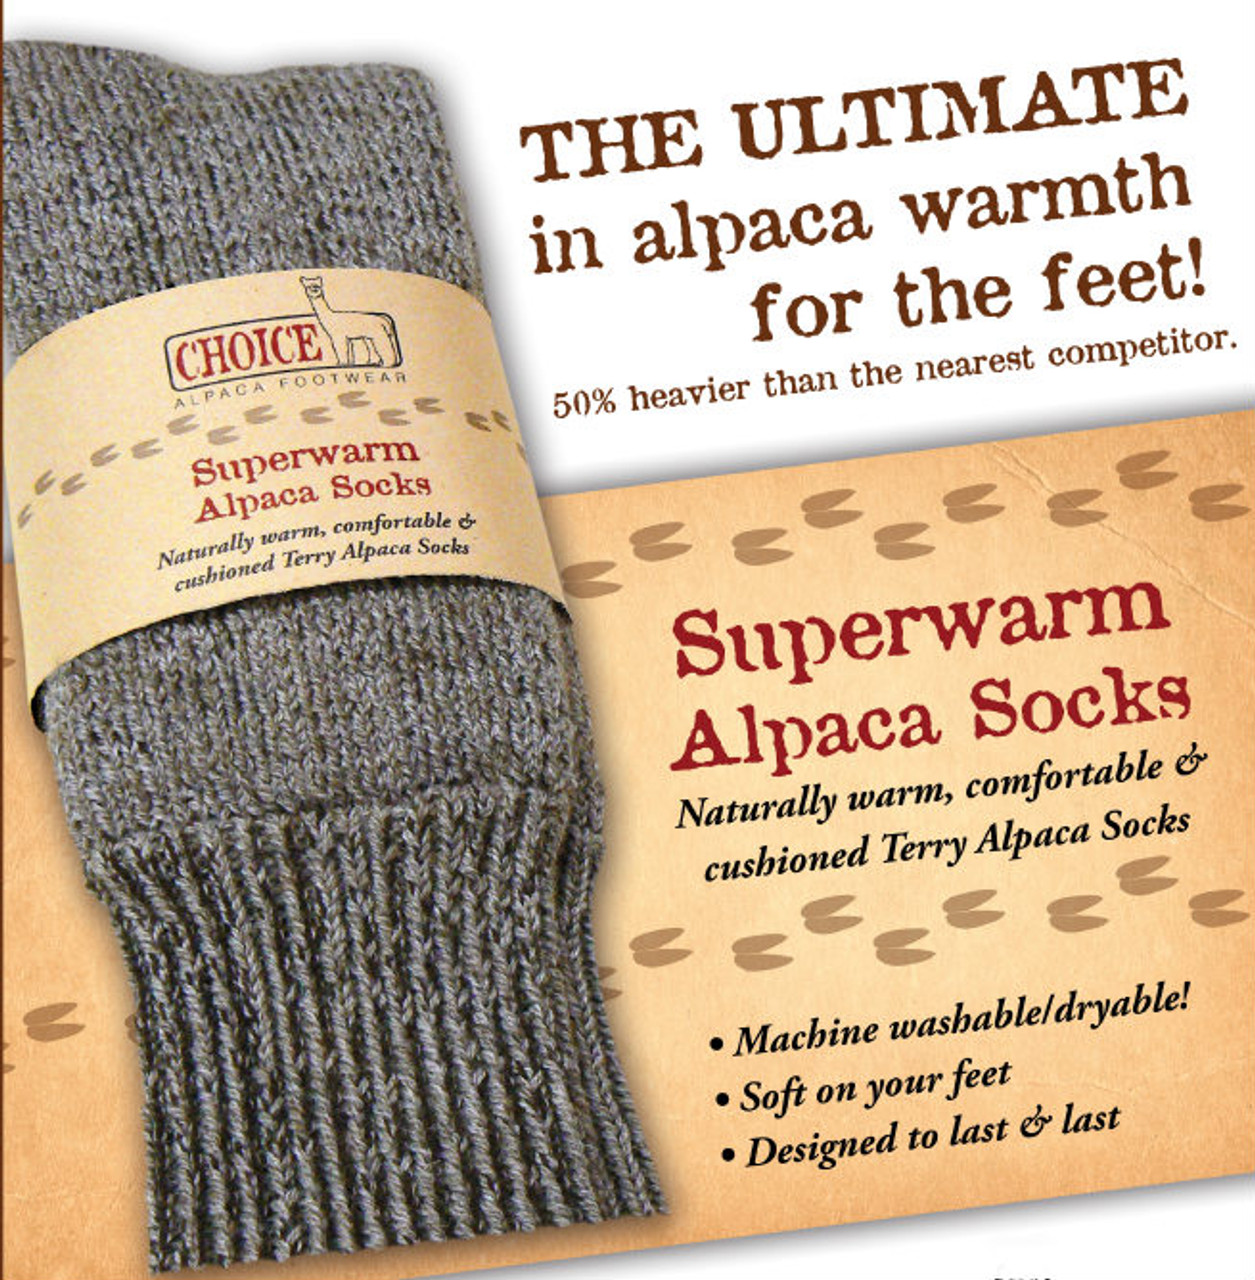 How to Care for Your Wool Hiking Socks (when your hiking) – Hollow Socks